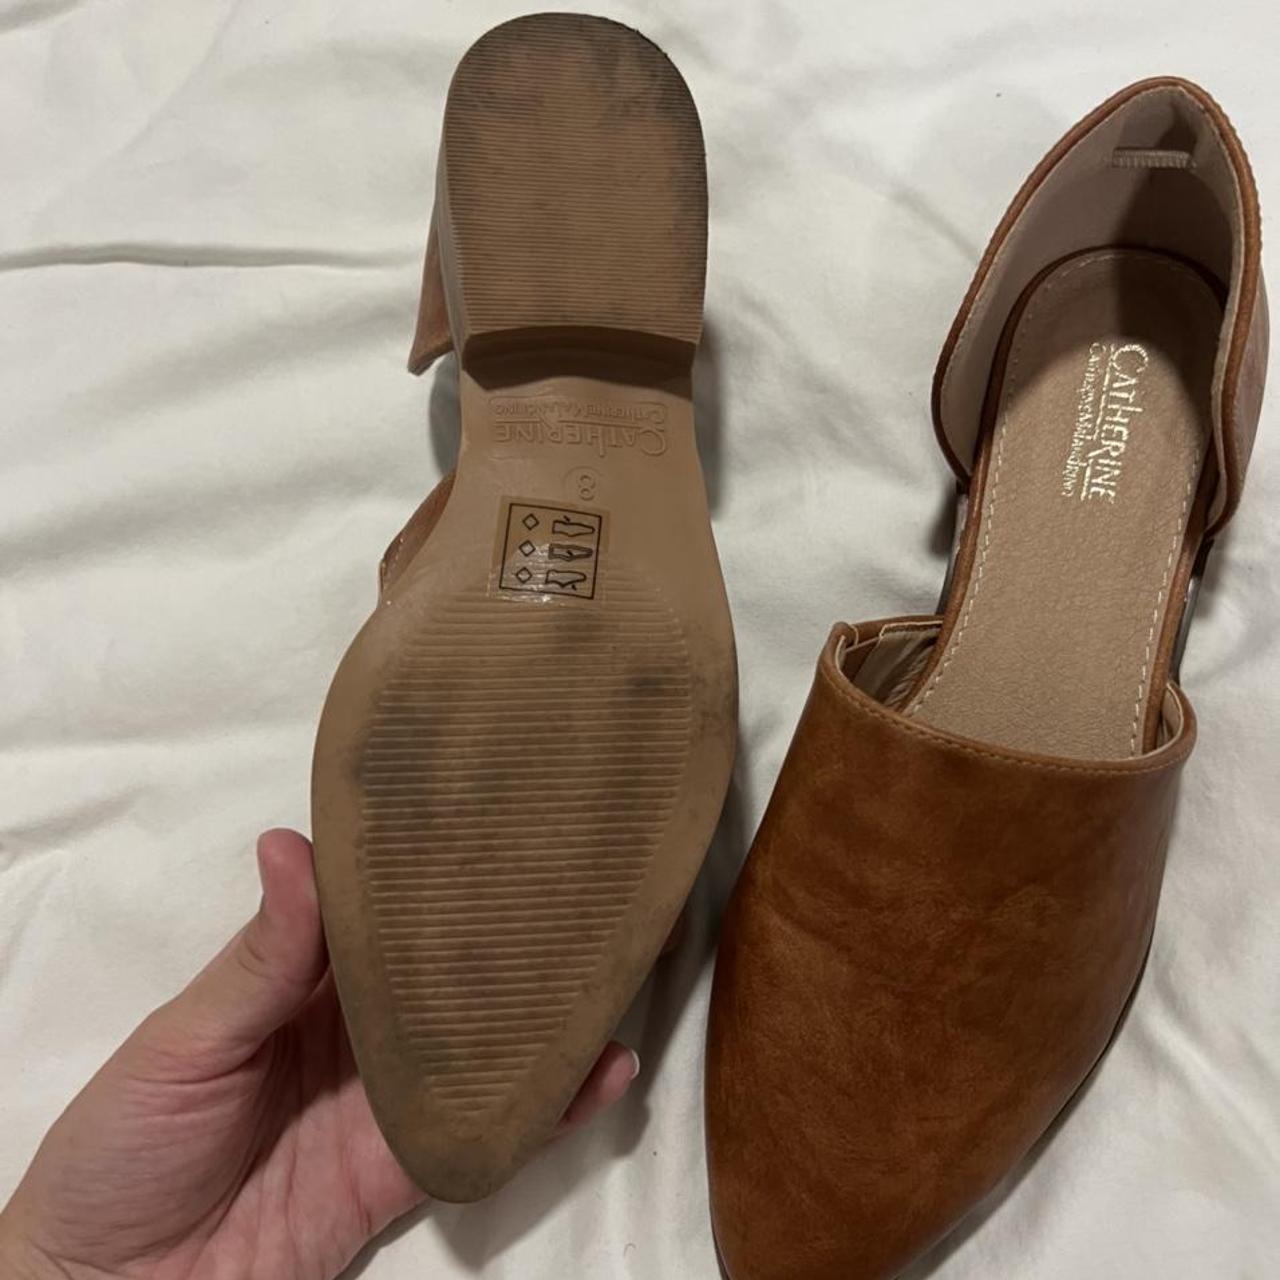 Product Image 2 - Target shoes, mules, light brown